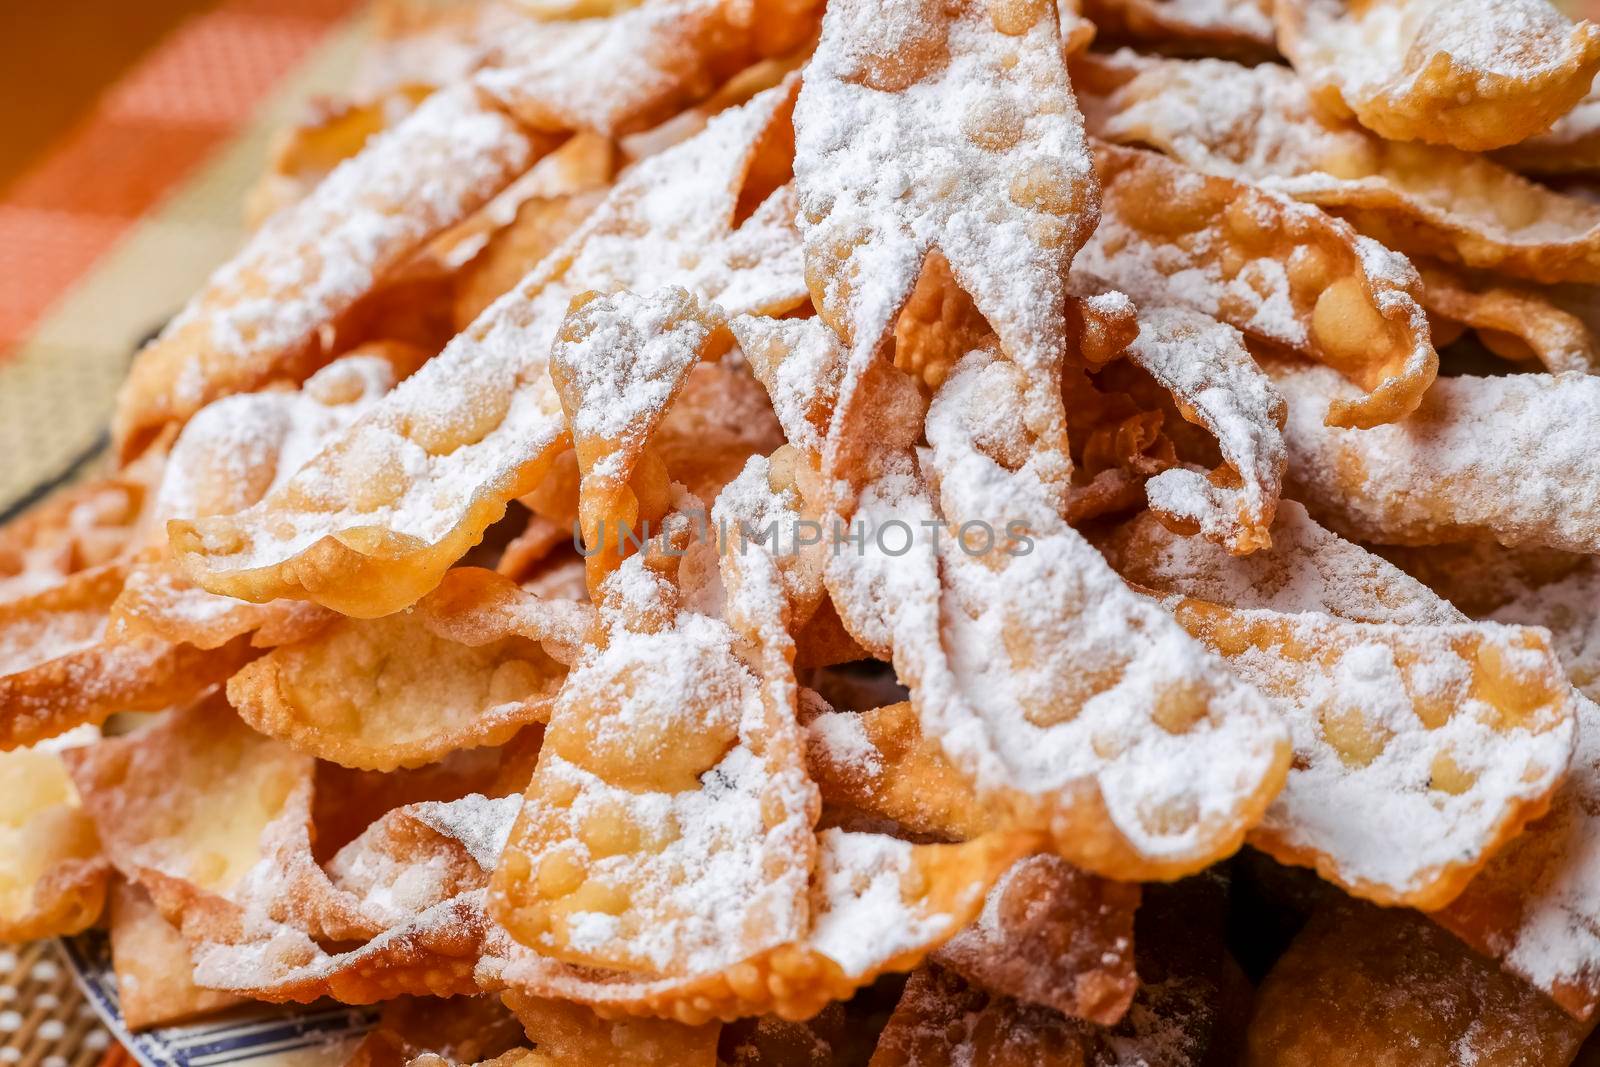 Crunchy pastry, cookies, twigs or crunches in powdered sugar.